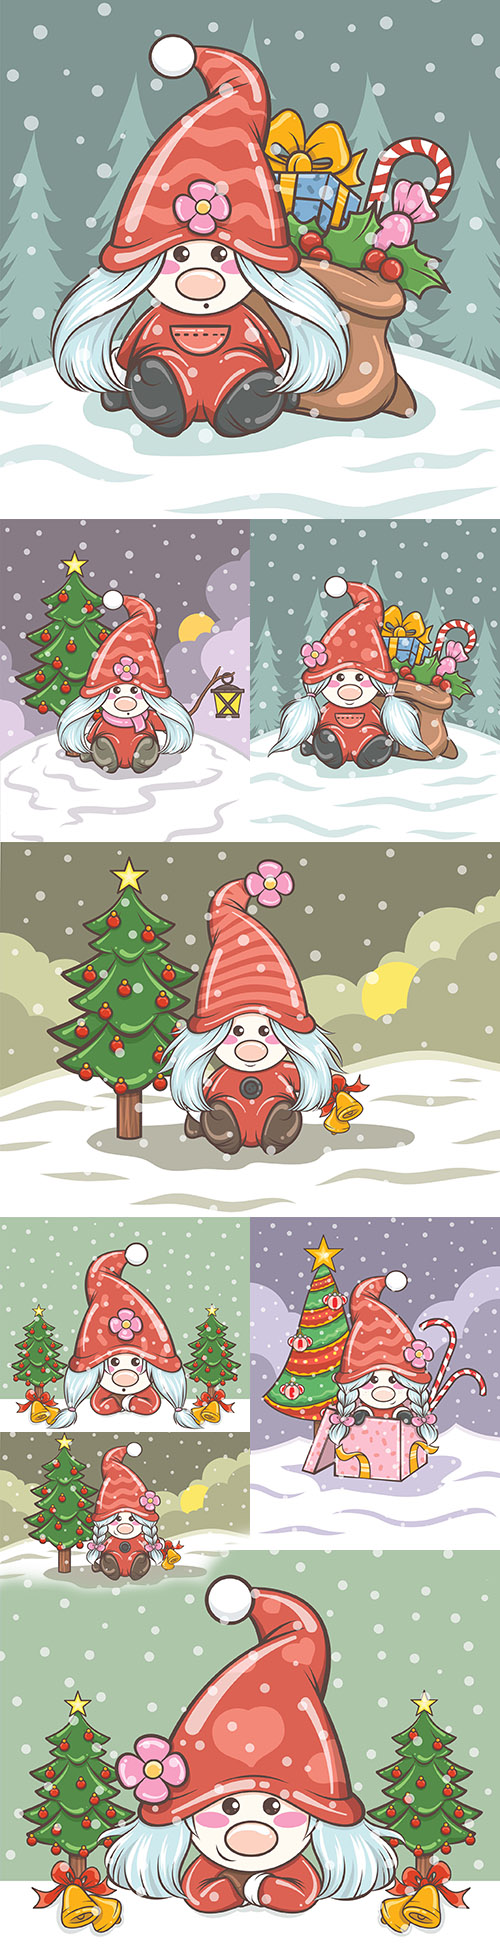 Sweet girl gnome with gifts Christmas illustration
